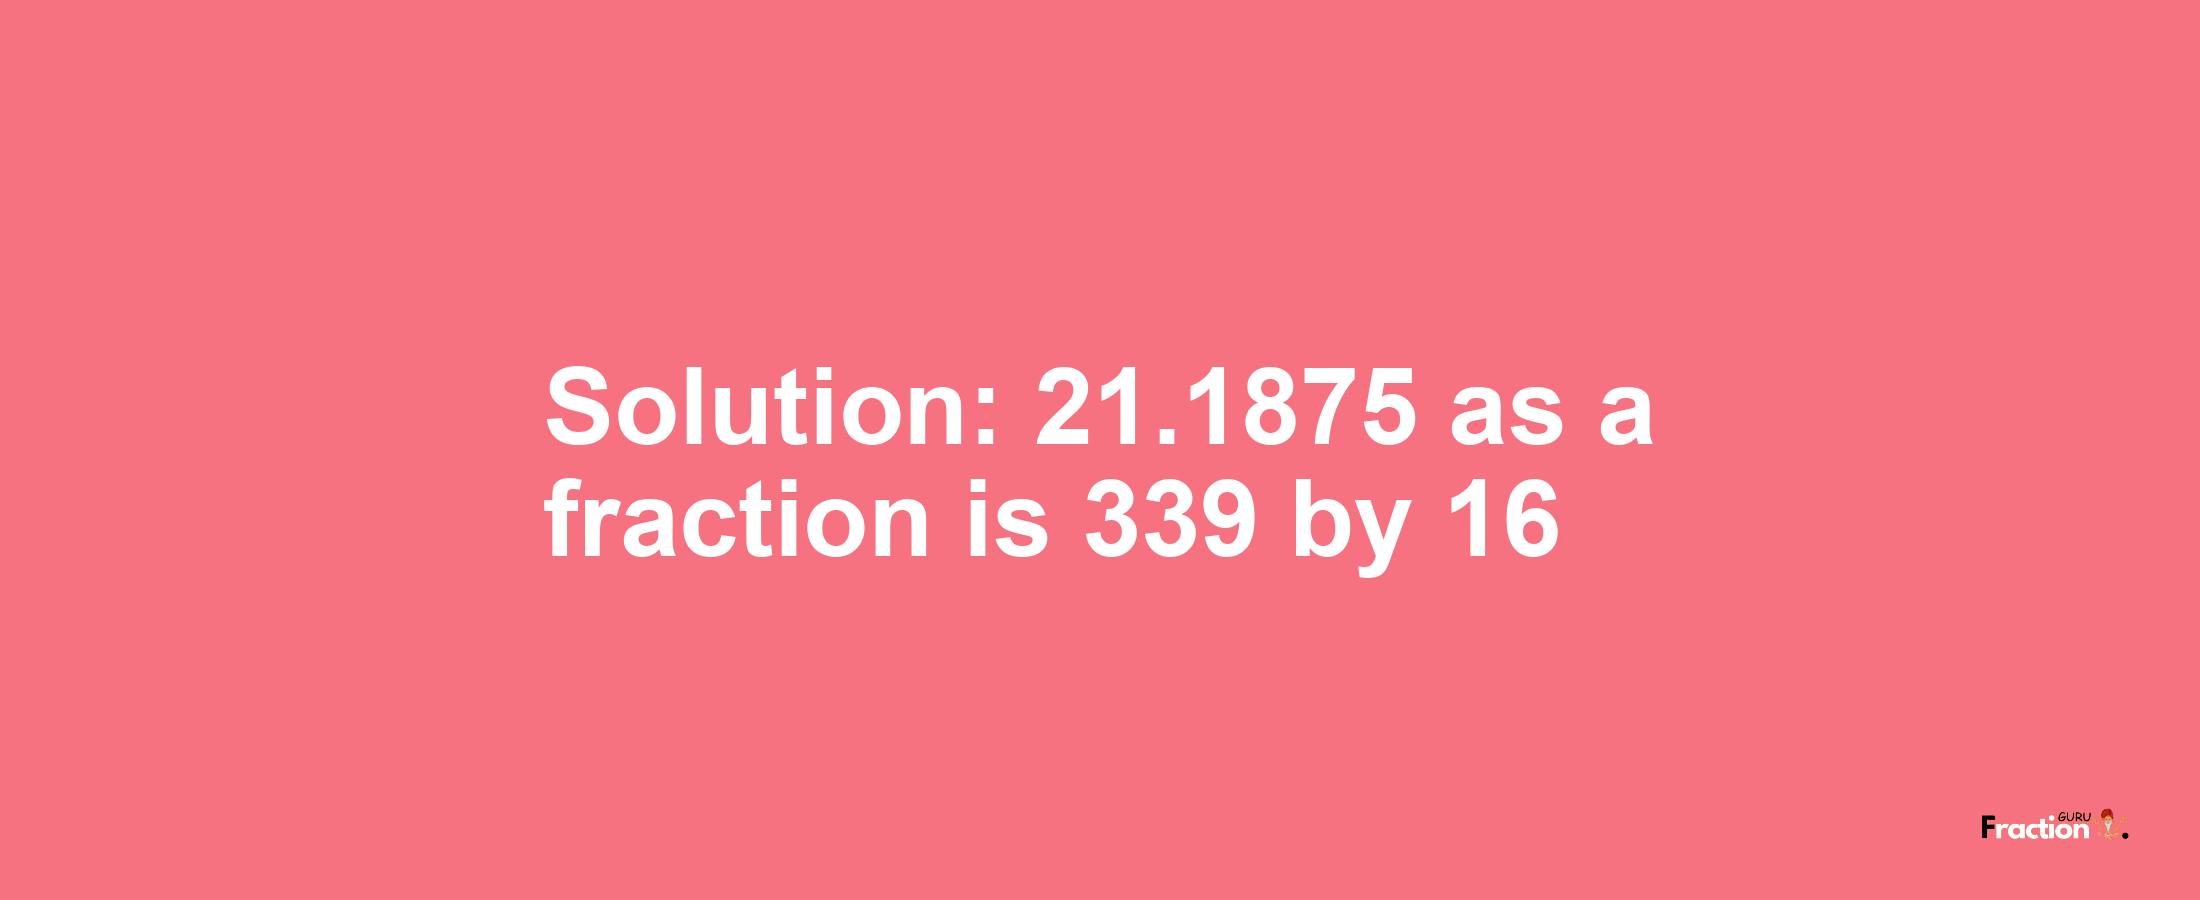 Solution:21.1875 as a fraction is 339/16